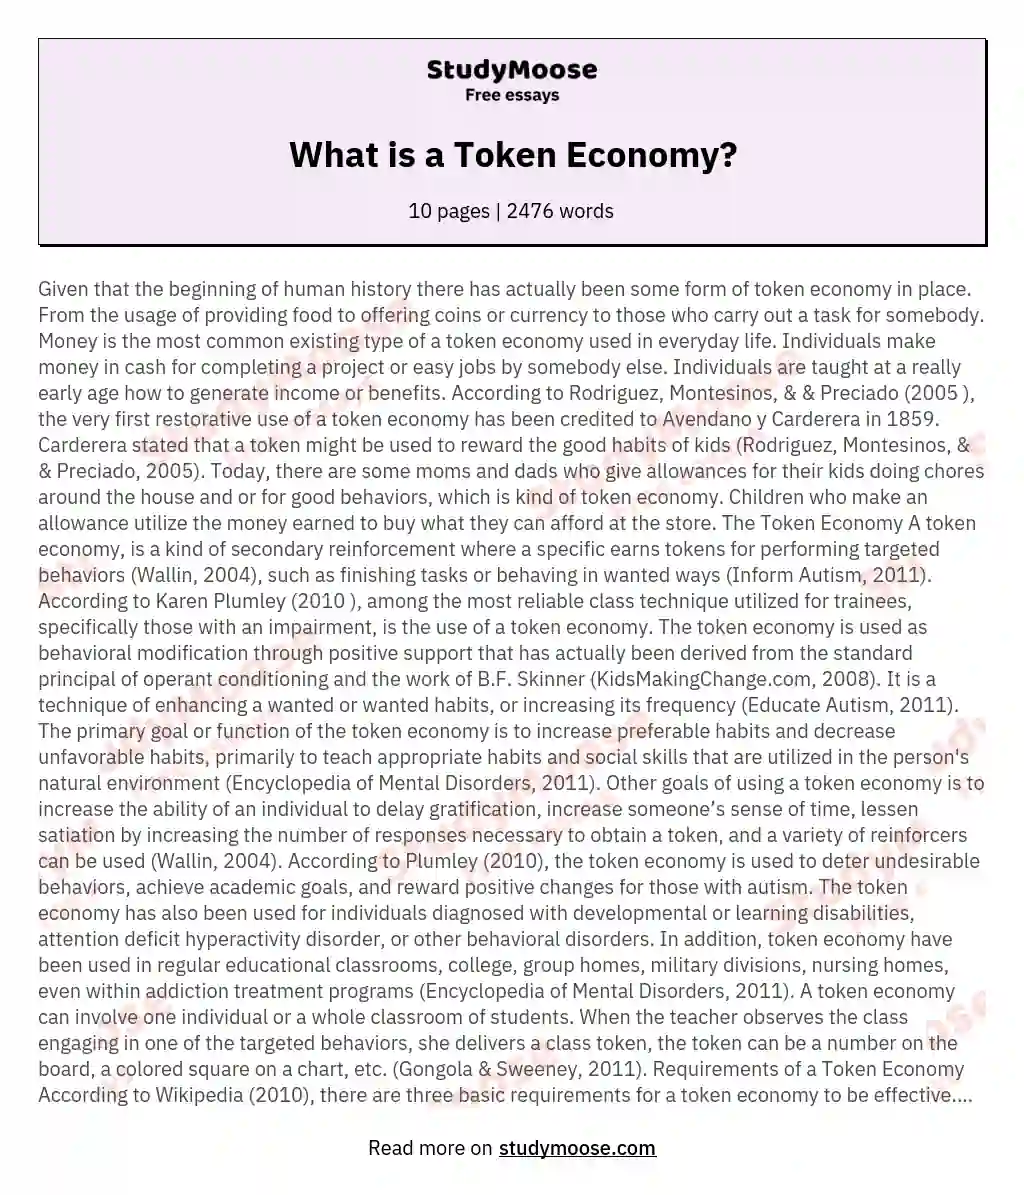 What is a Token Economy?